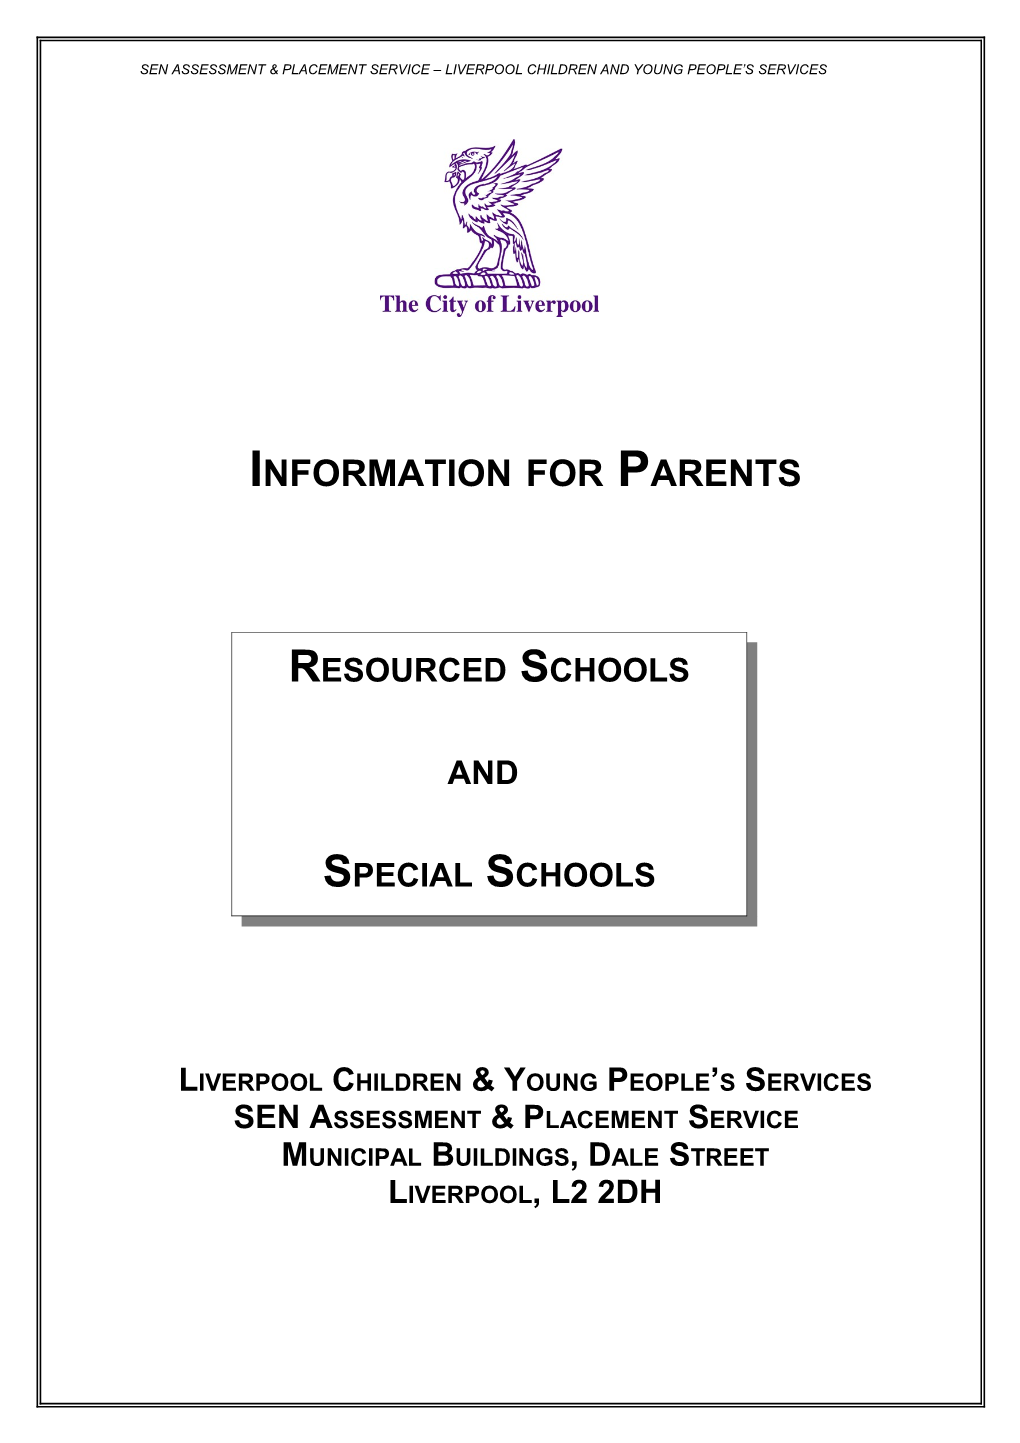 Sen Assessment & Placement Service Liverpool Children and Young People S Services